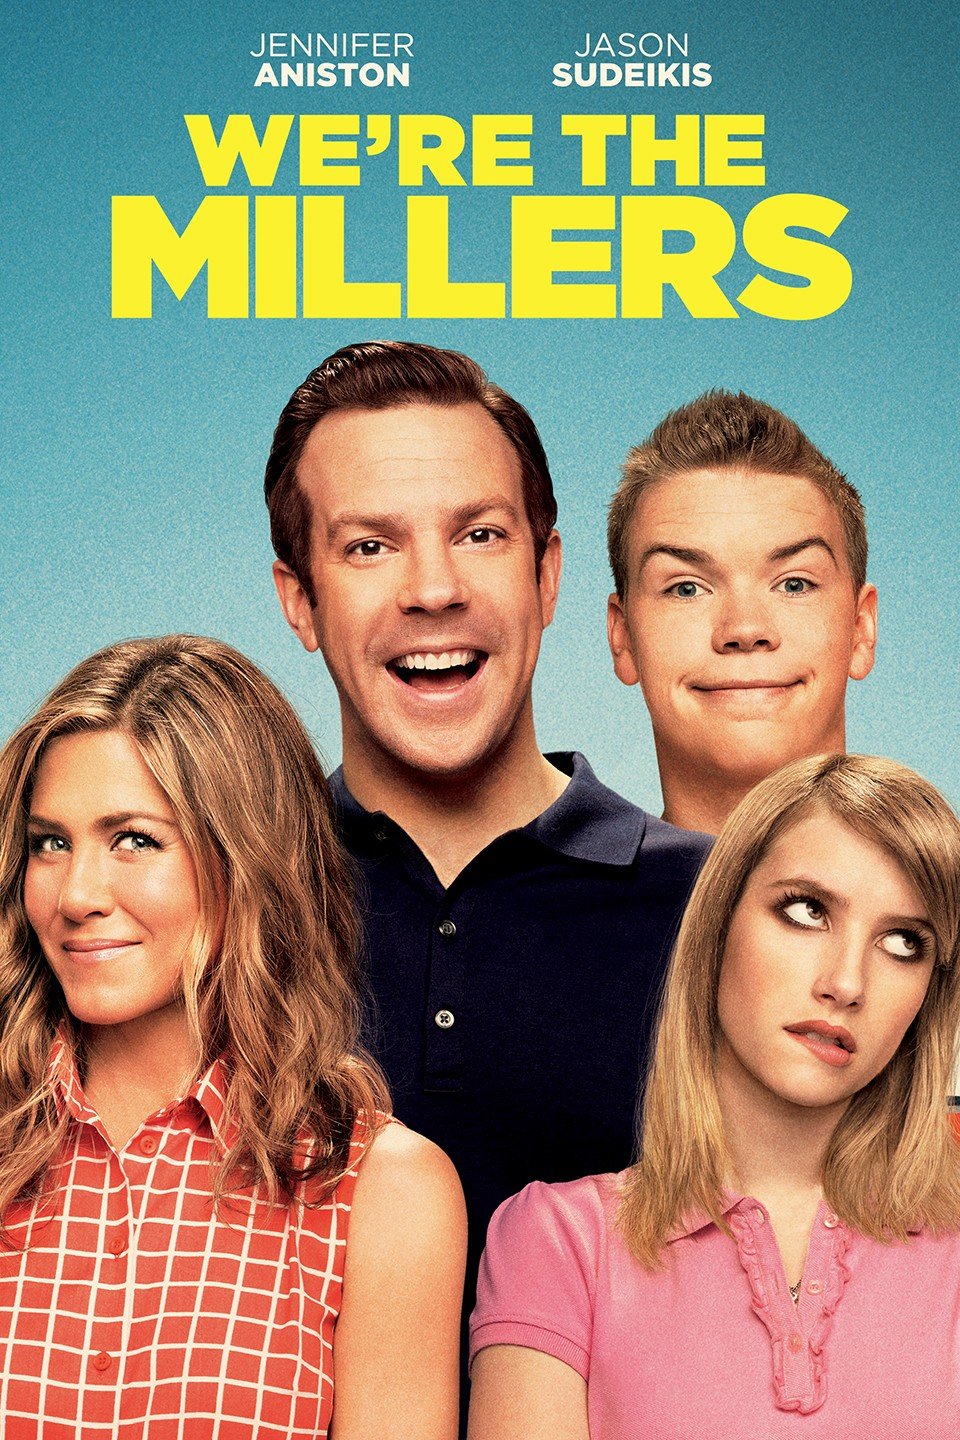 We are the Millers - VJ Junior